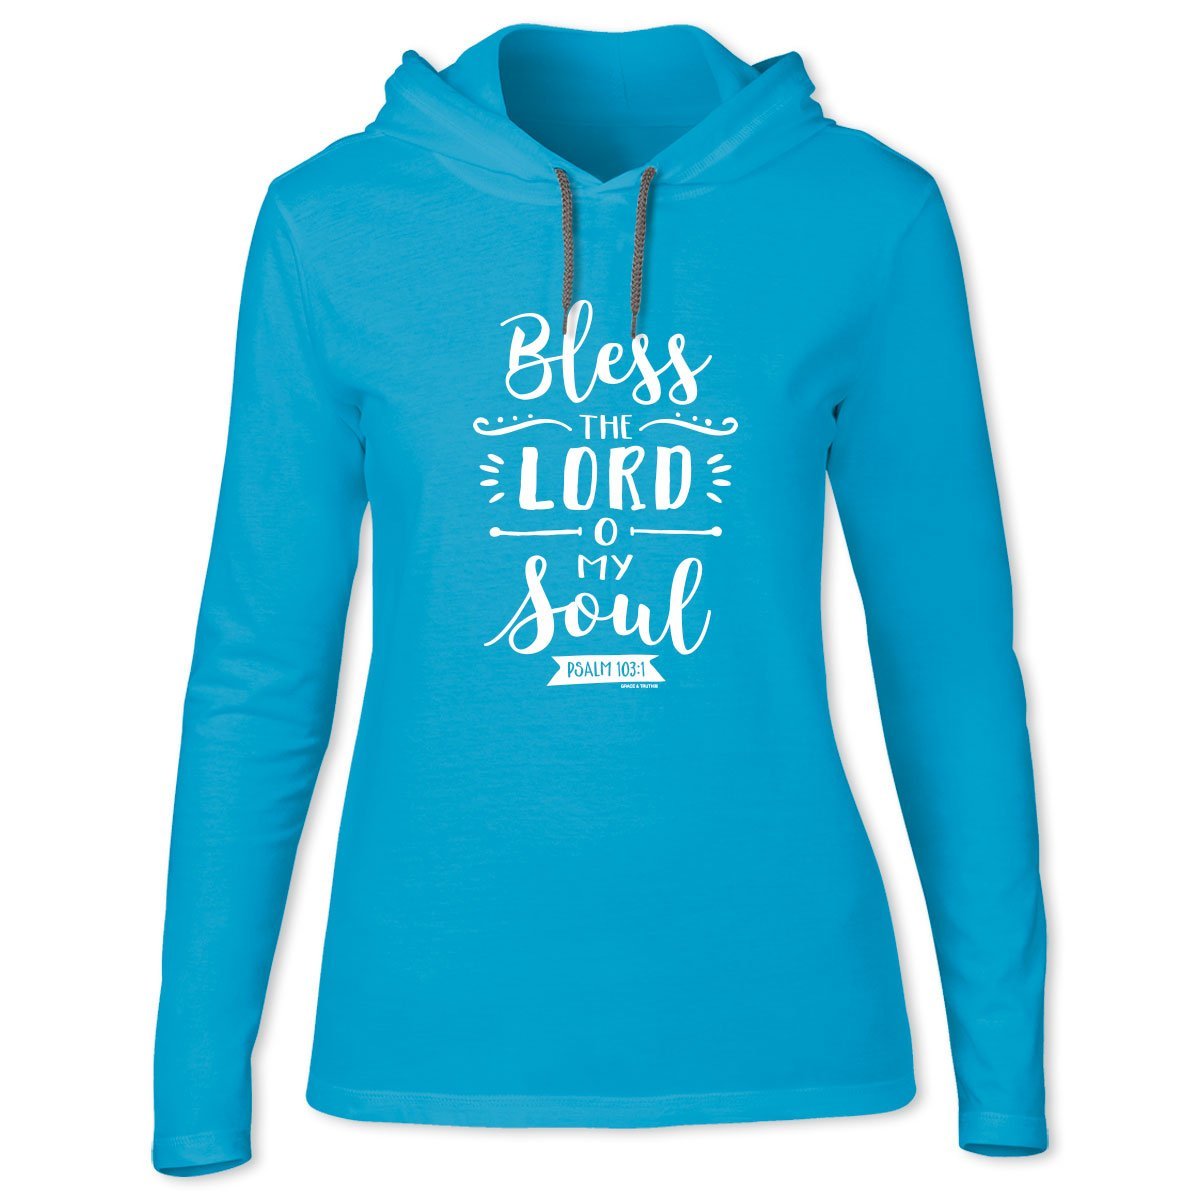 Cherished Girl Grace & Truth Bless the Lord Christian Long Sleeve Hoodie T Shirt